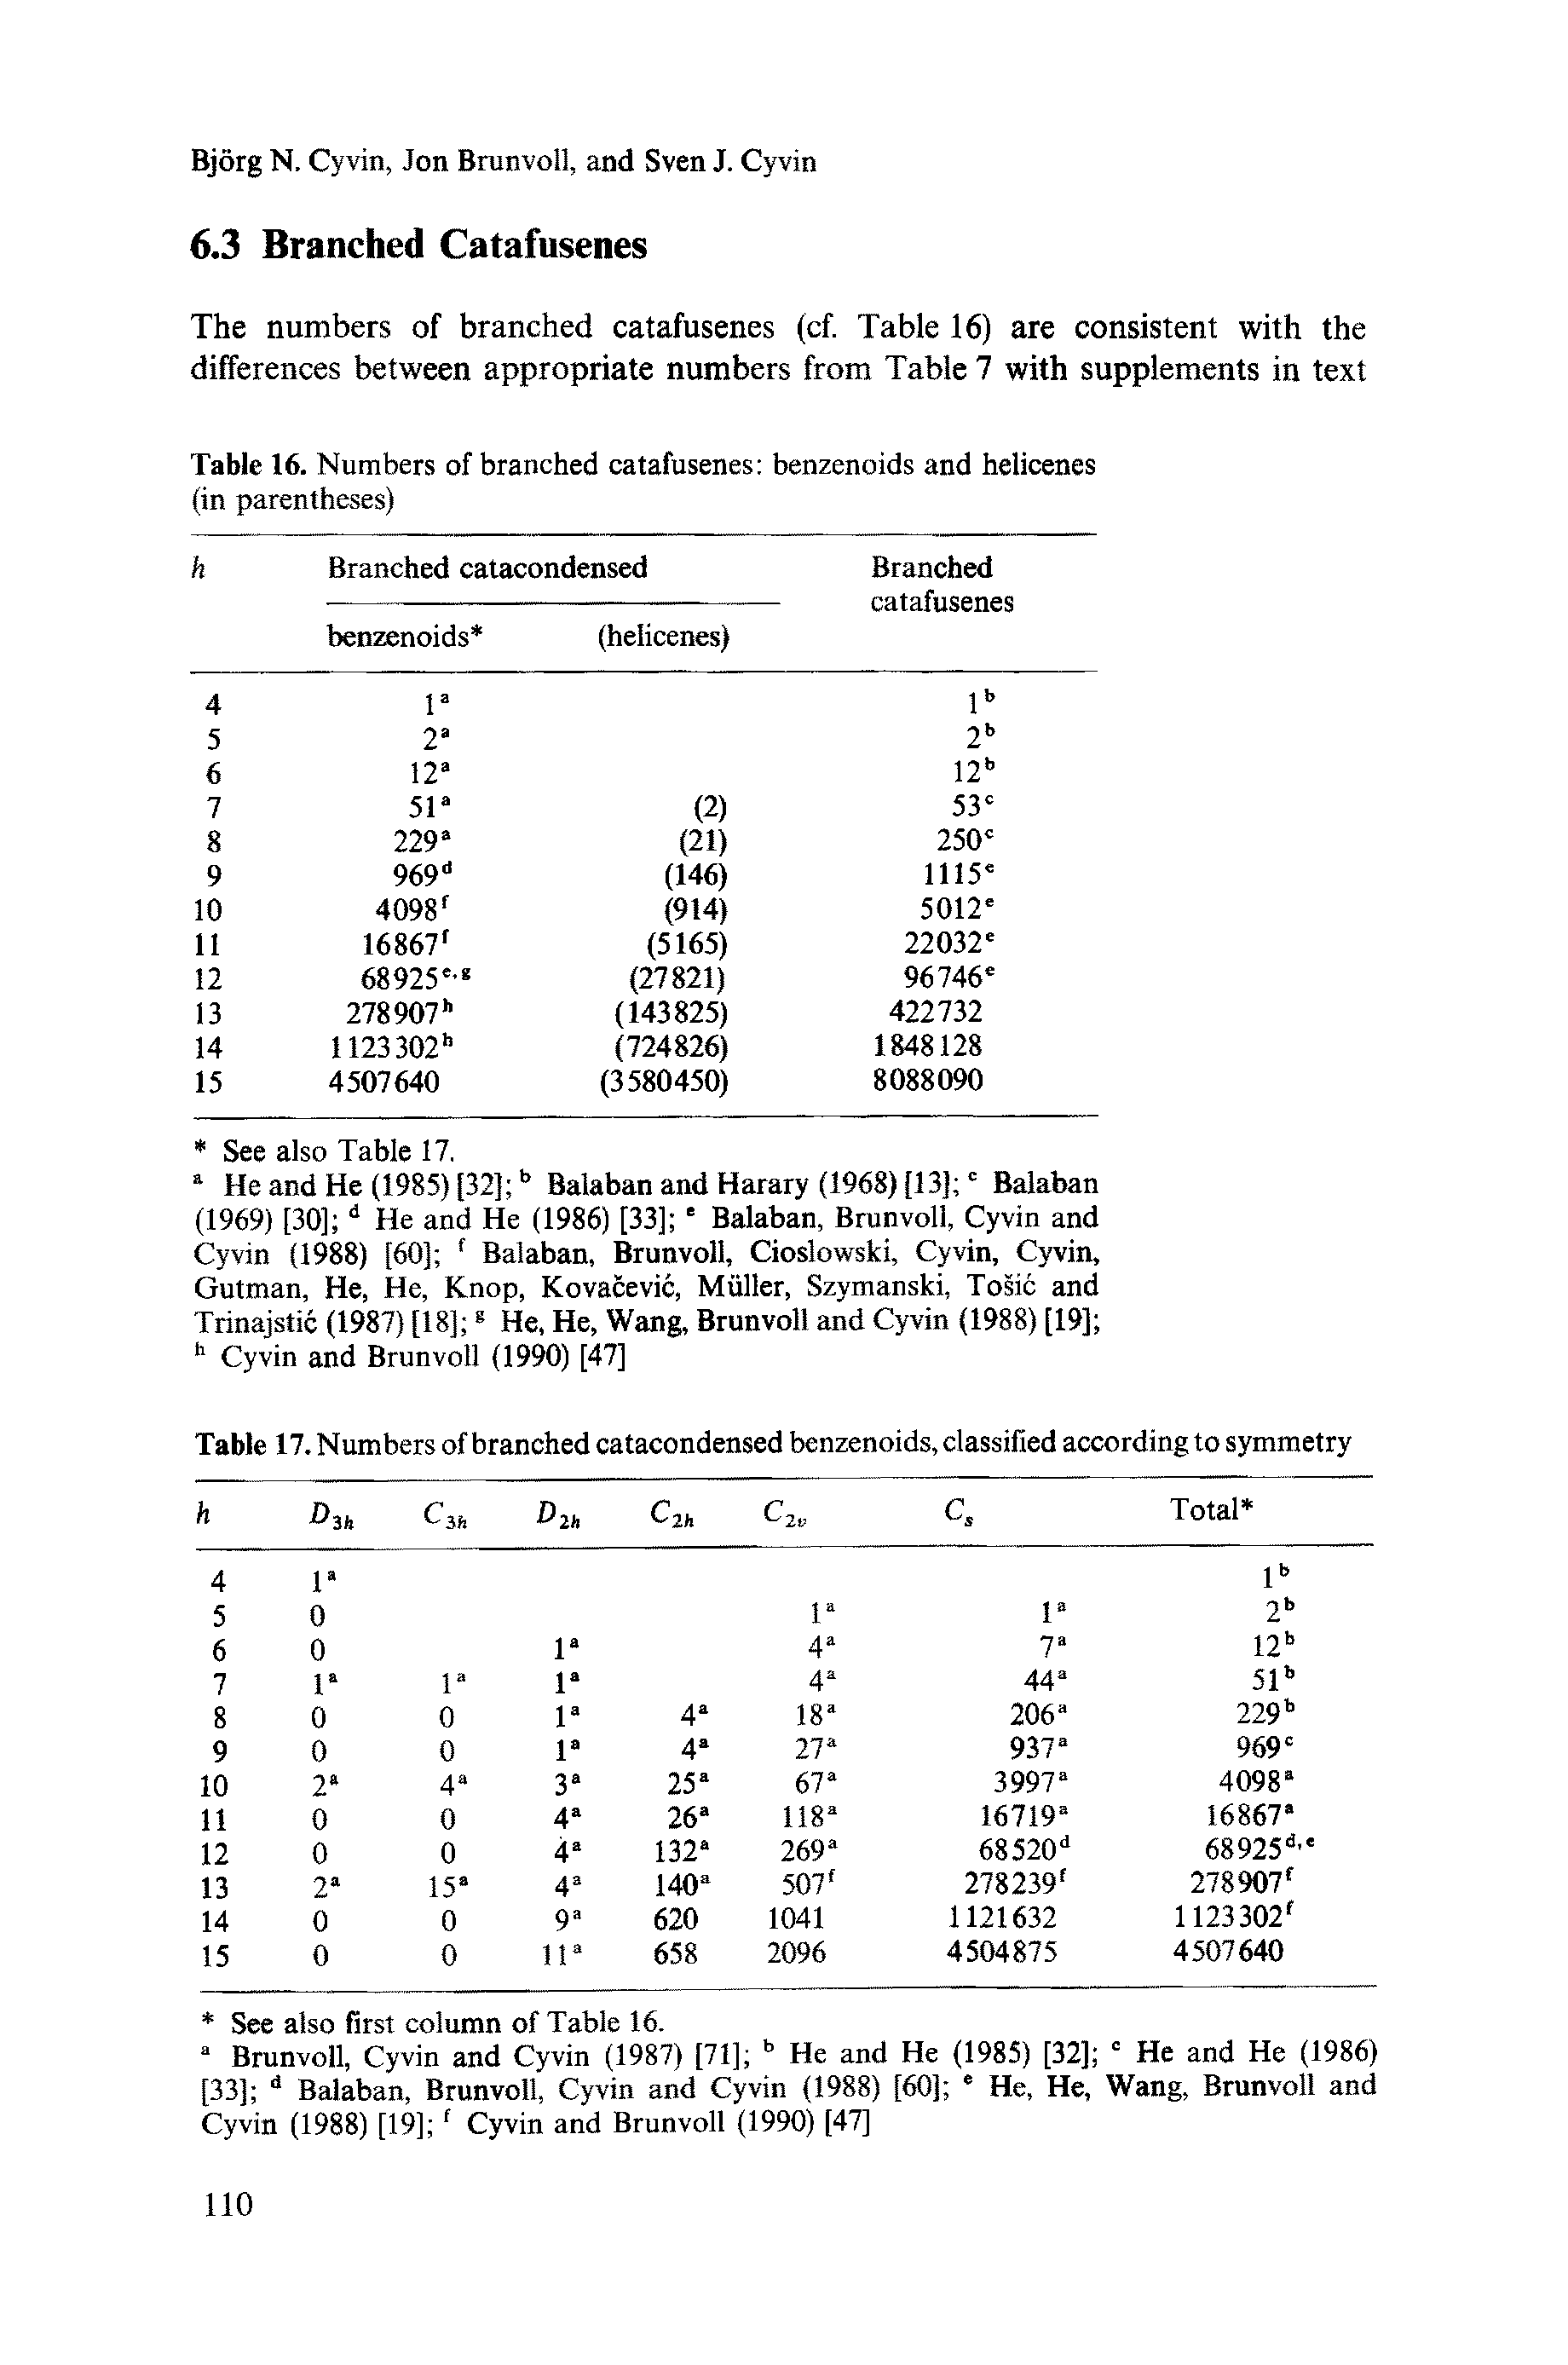 Table 17. Numbers of branched catacondensed benzenoids, classified according to symmetry...